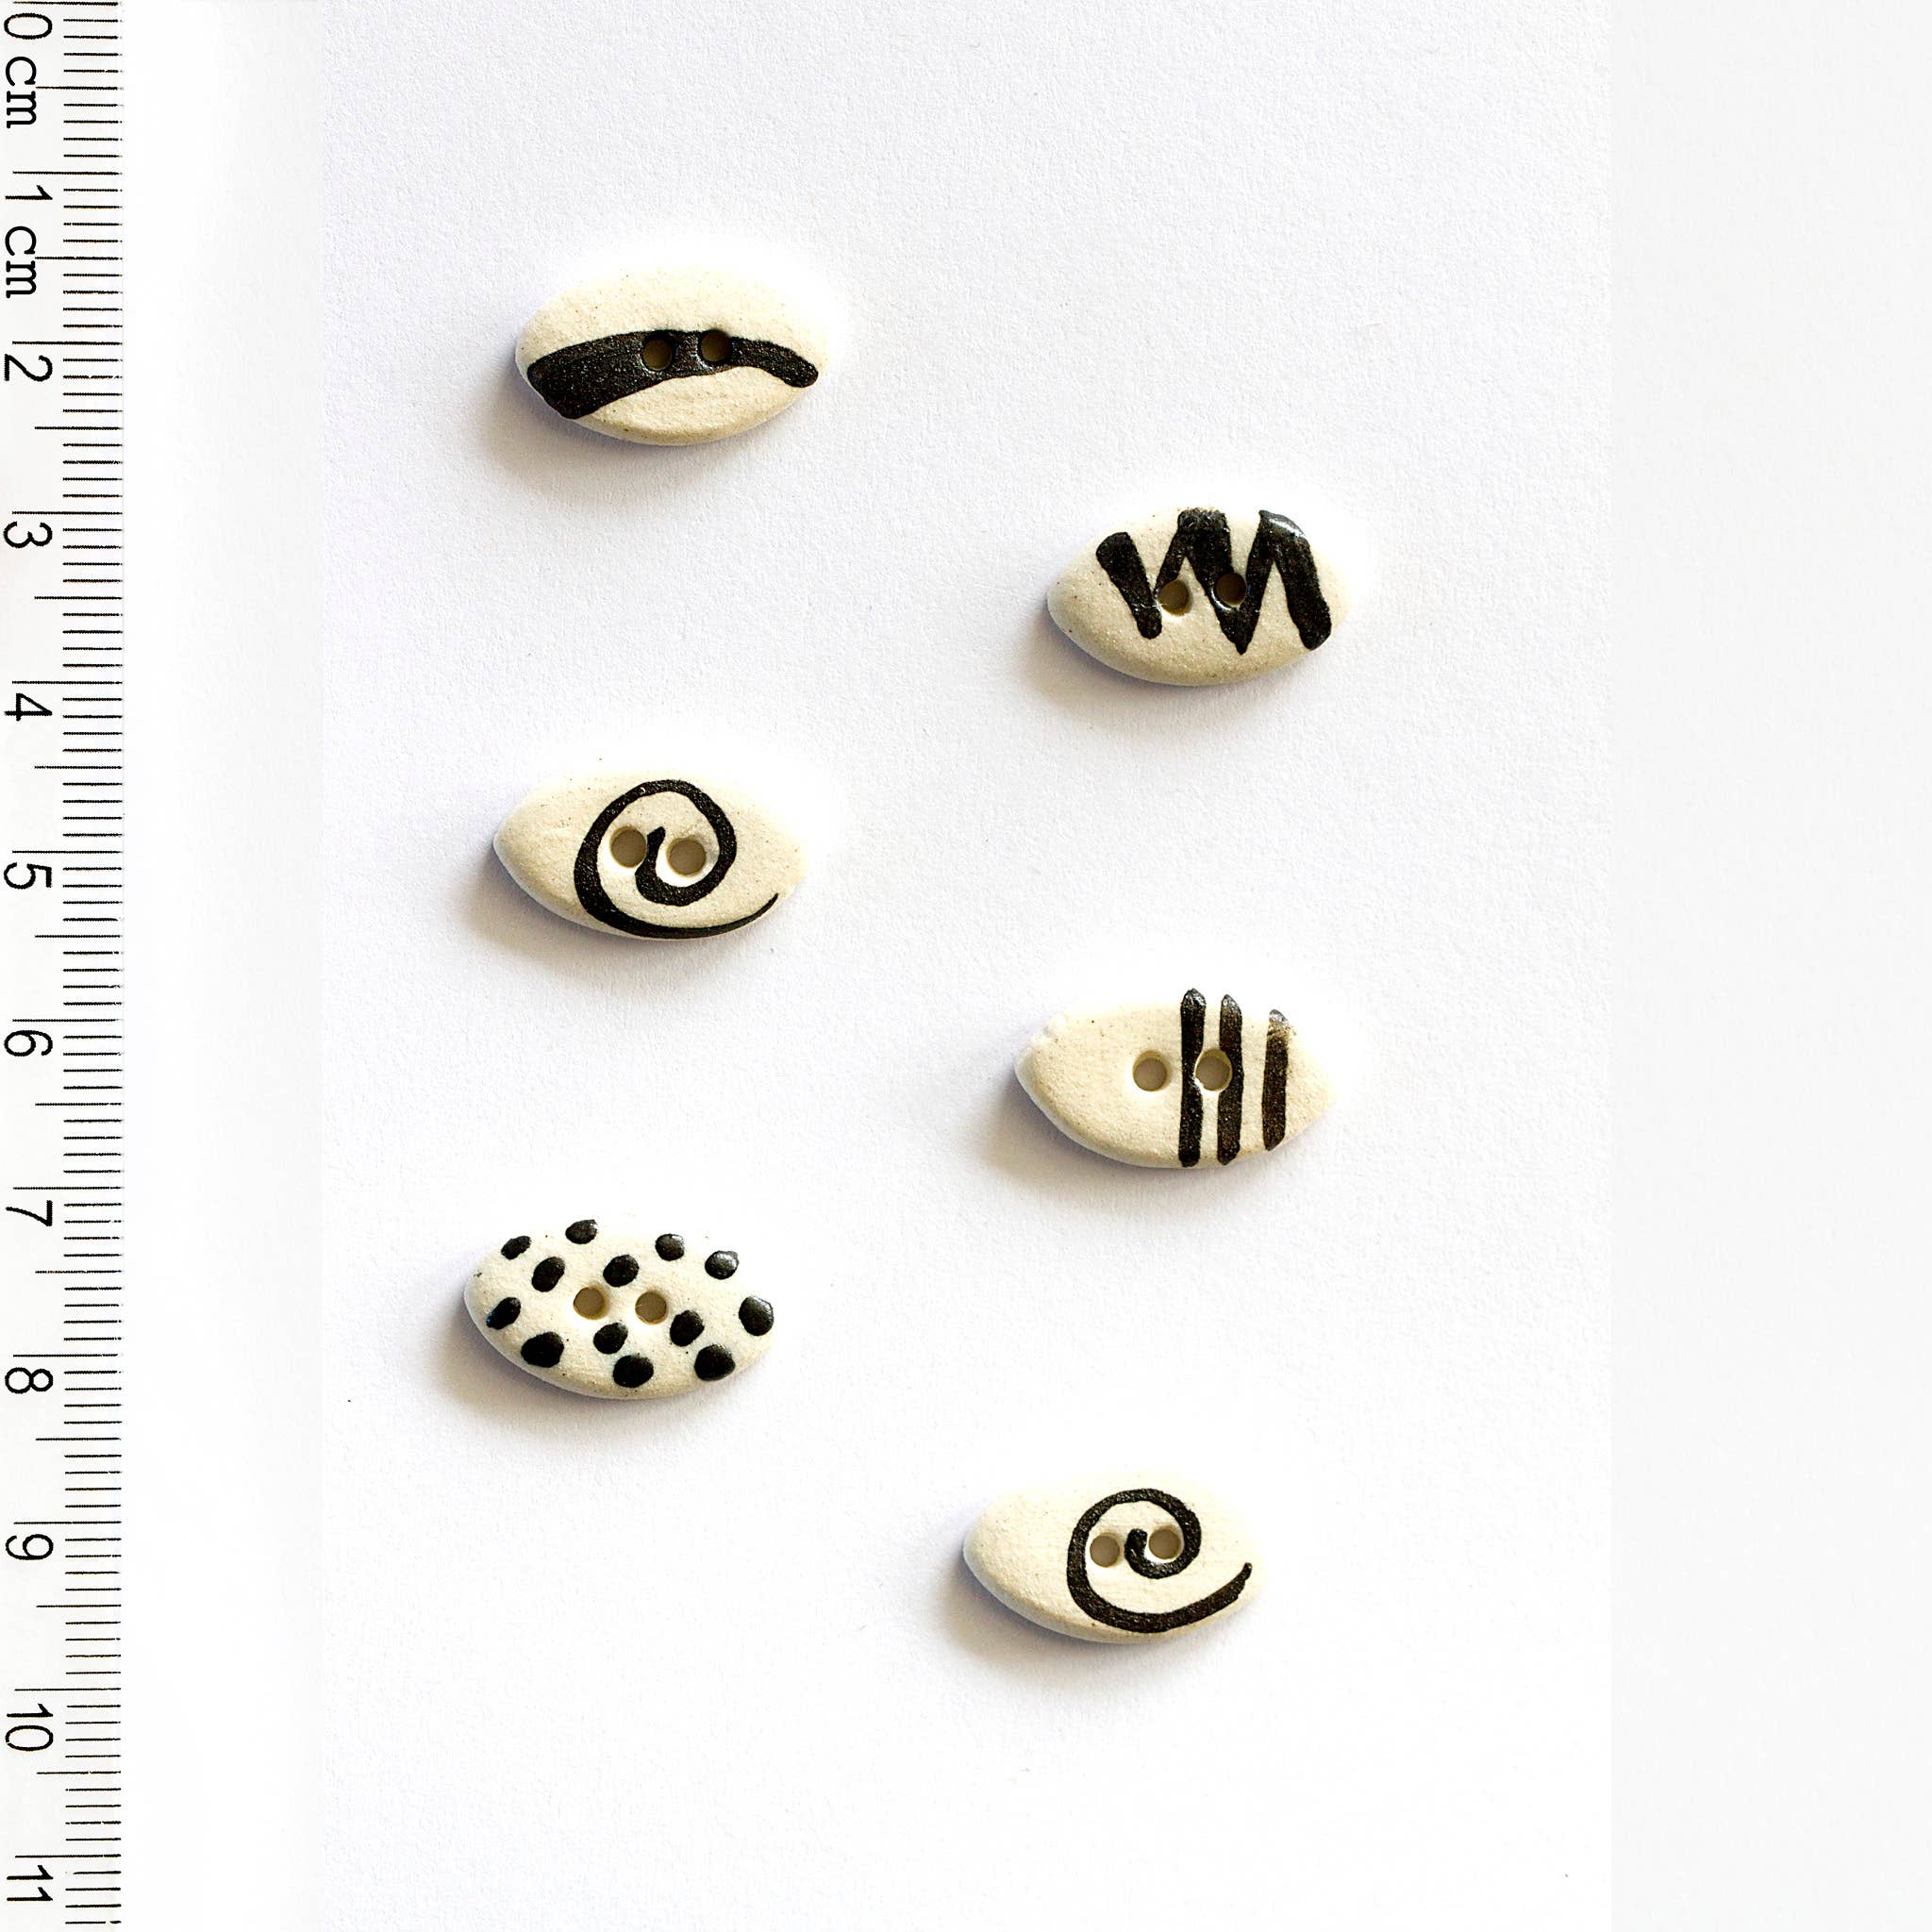 Incomparable Buttons - 6 Geometric Ovals Black and White Mixed Pattern Buttons